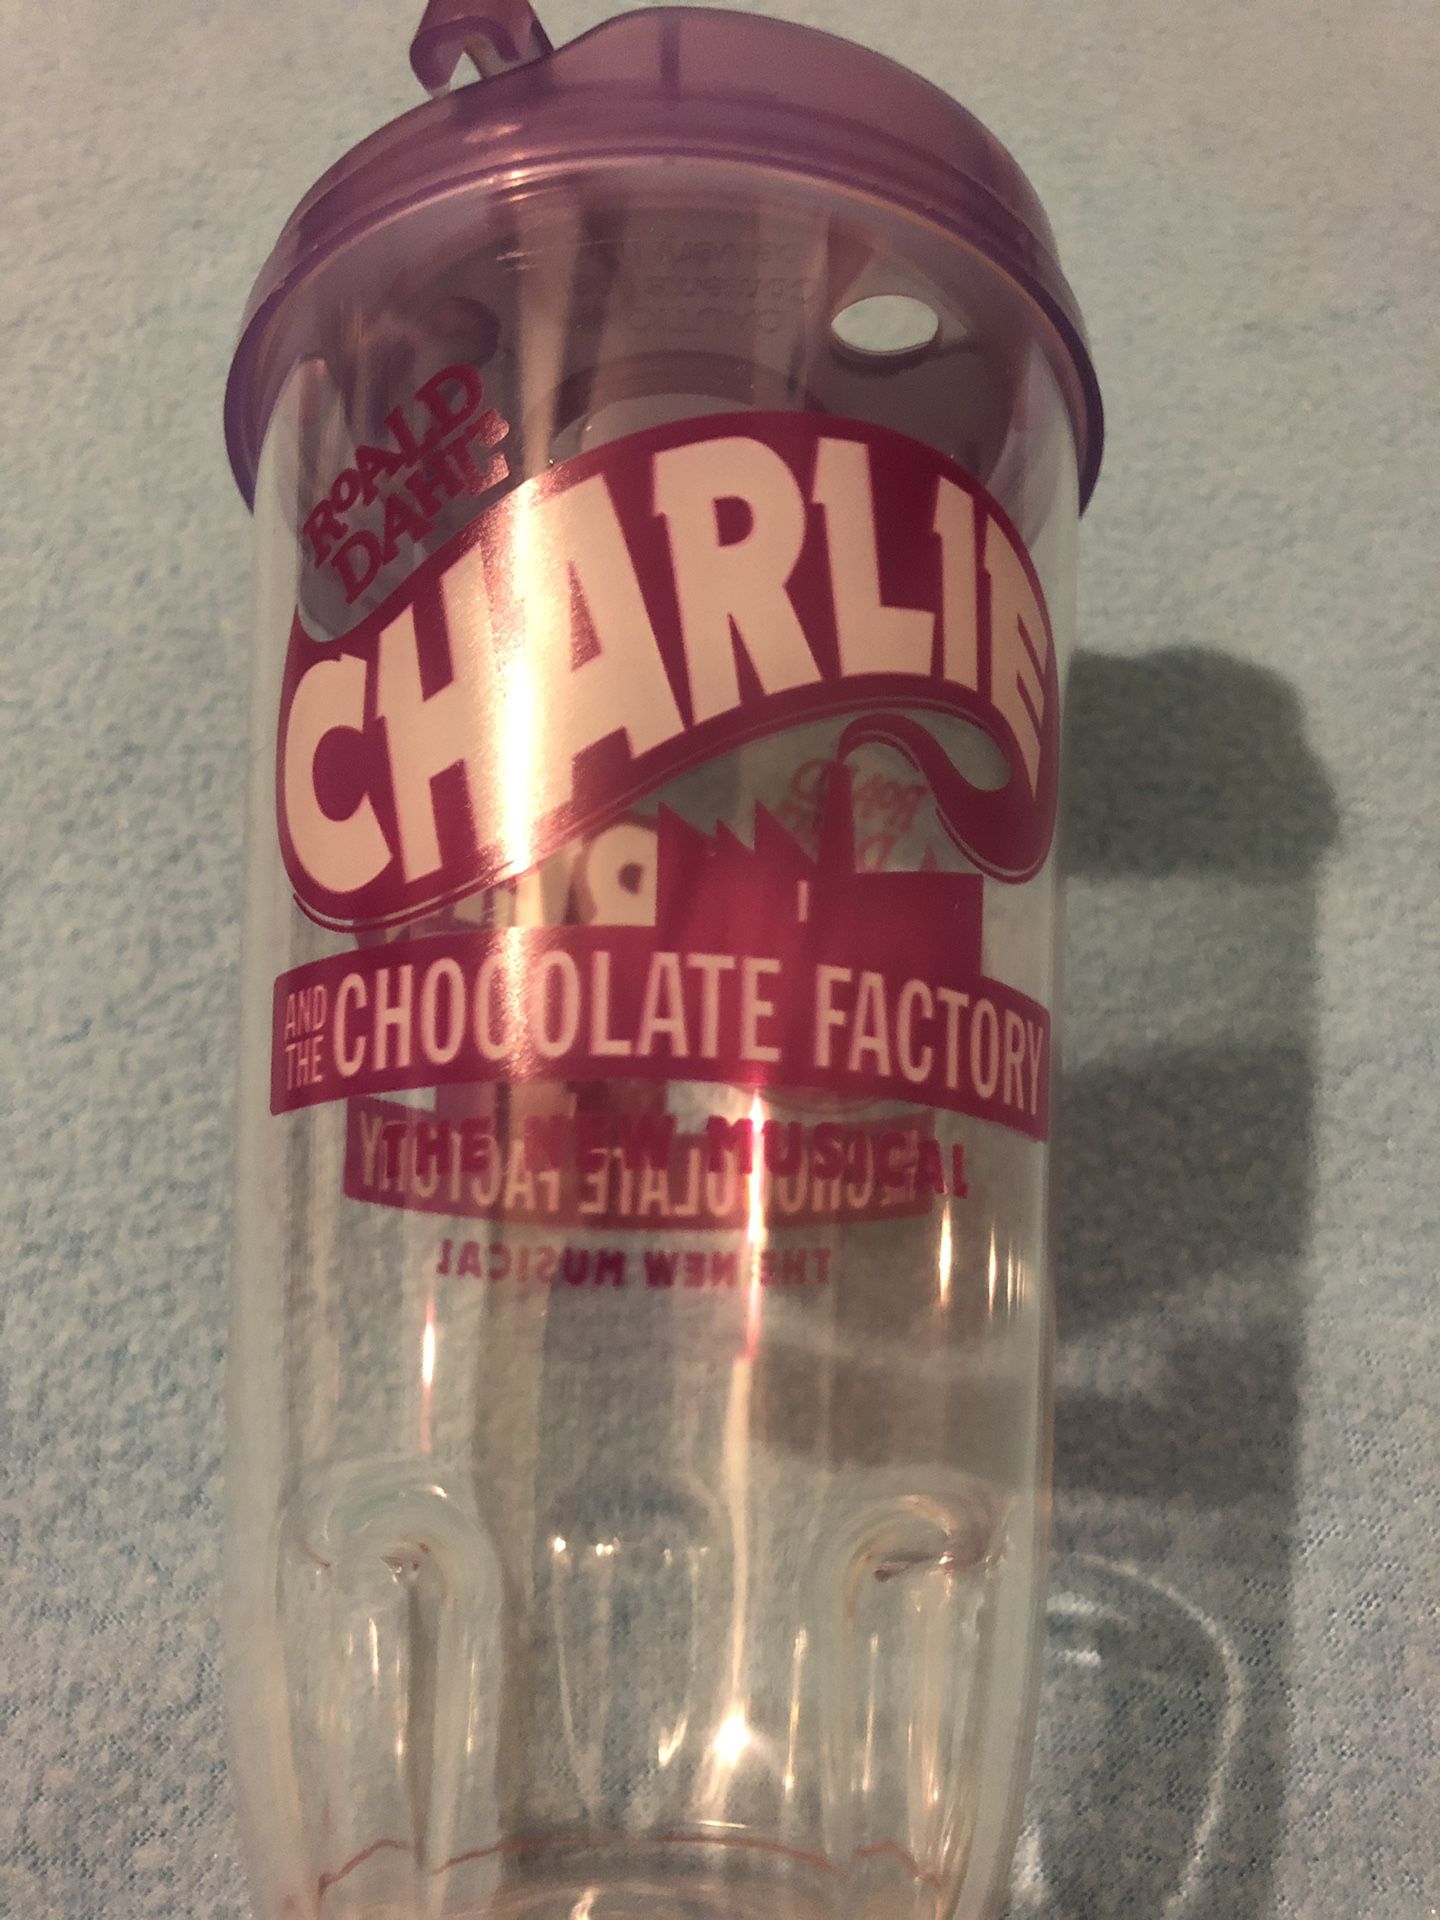 Charlie and the chocolate factory cup broadway playbill